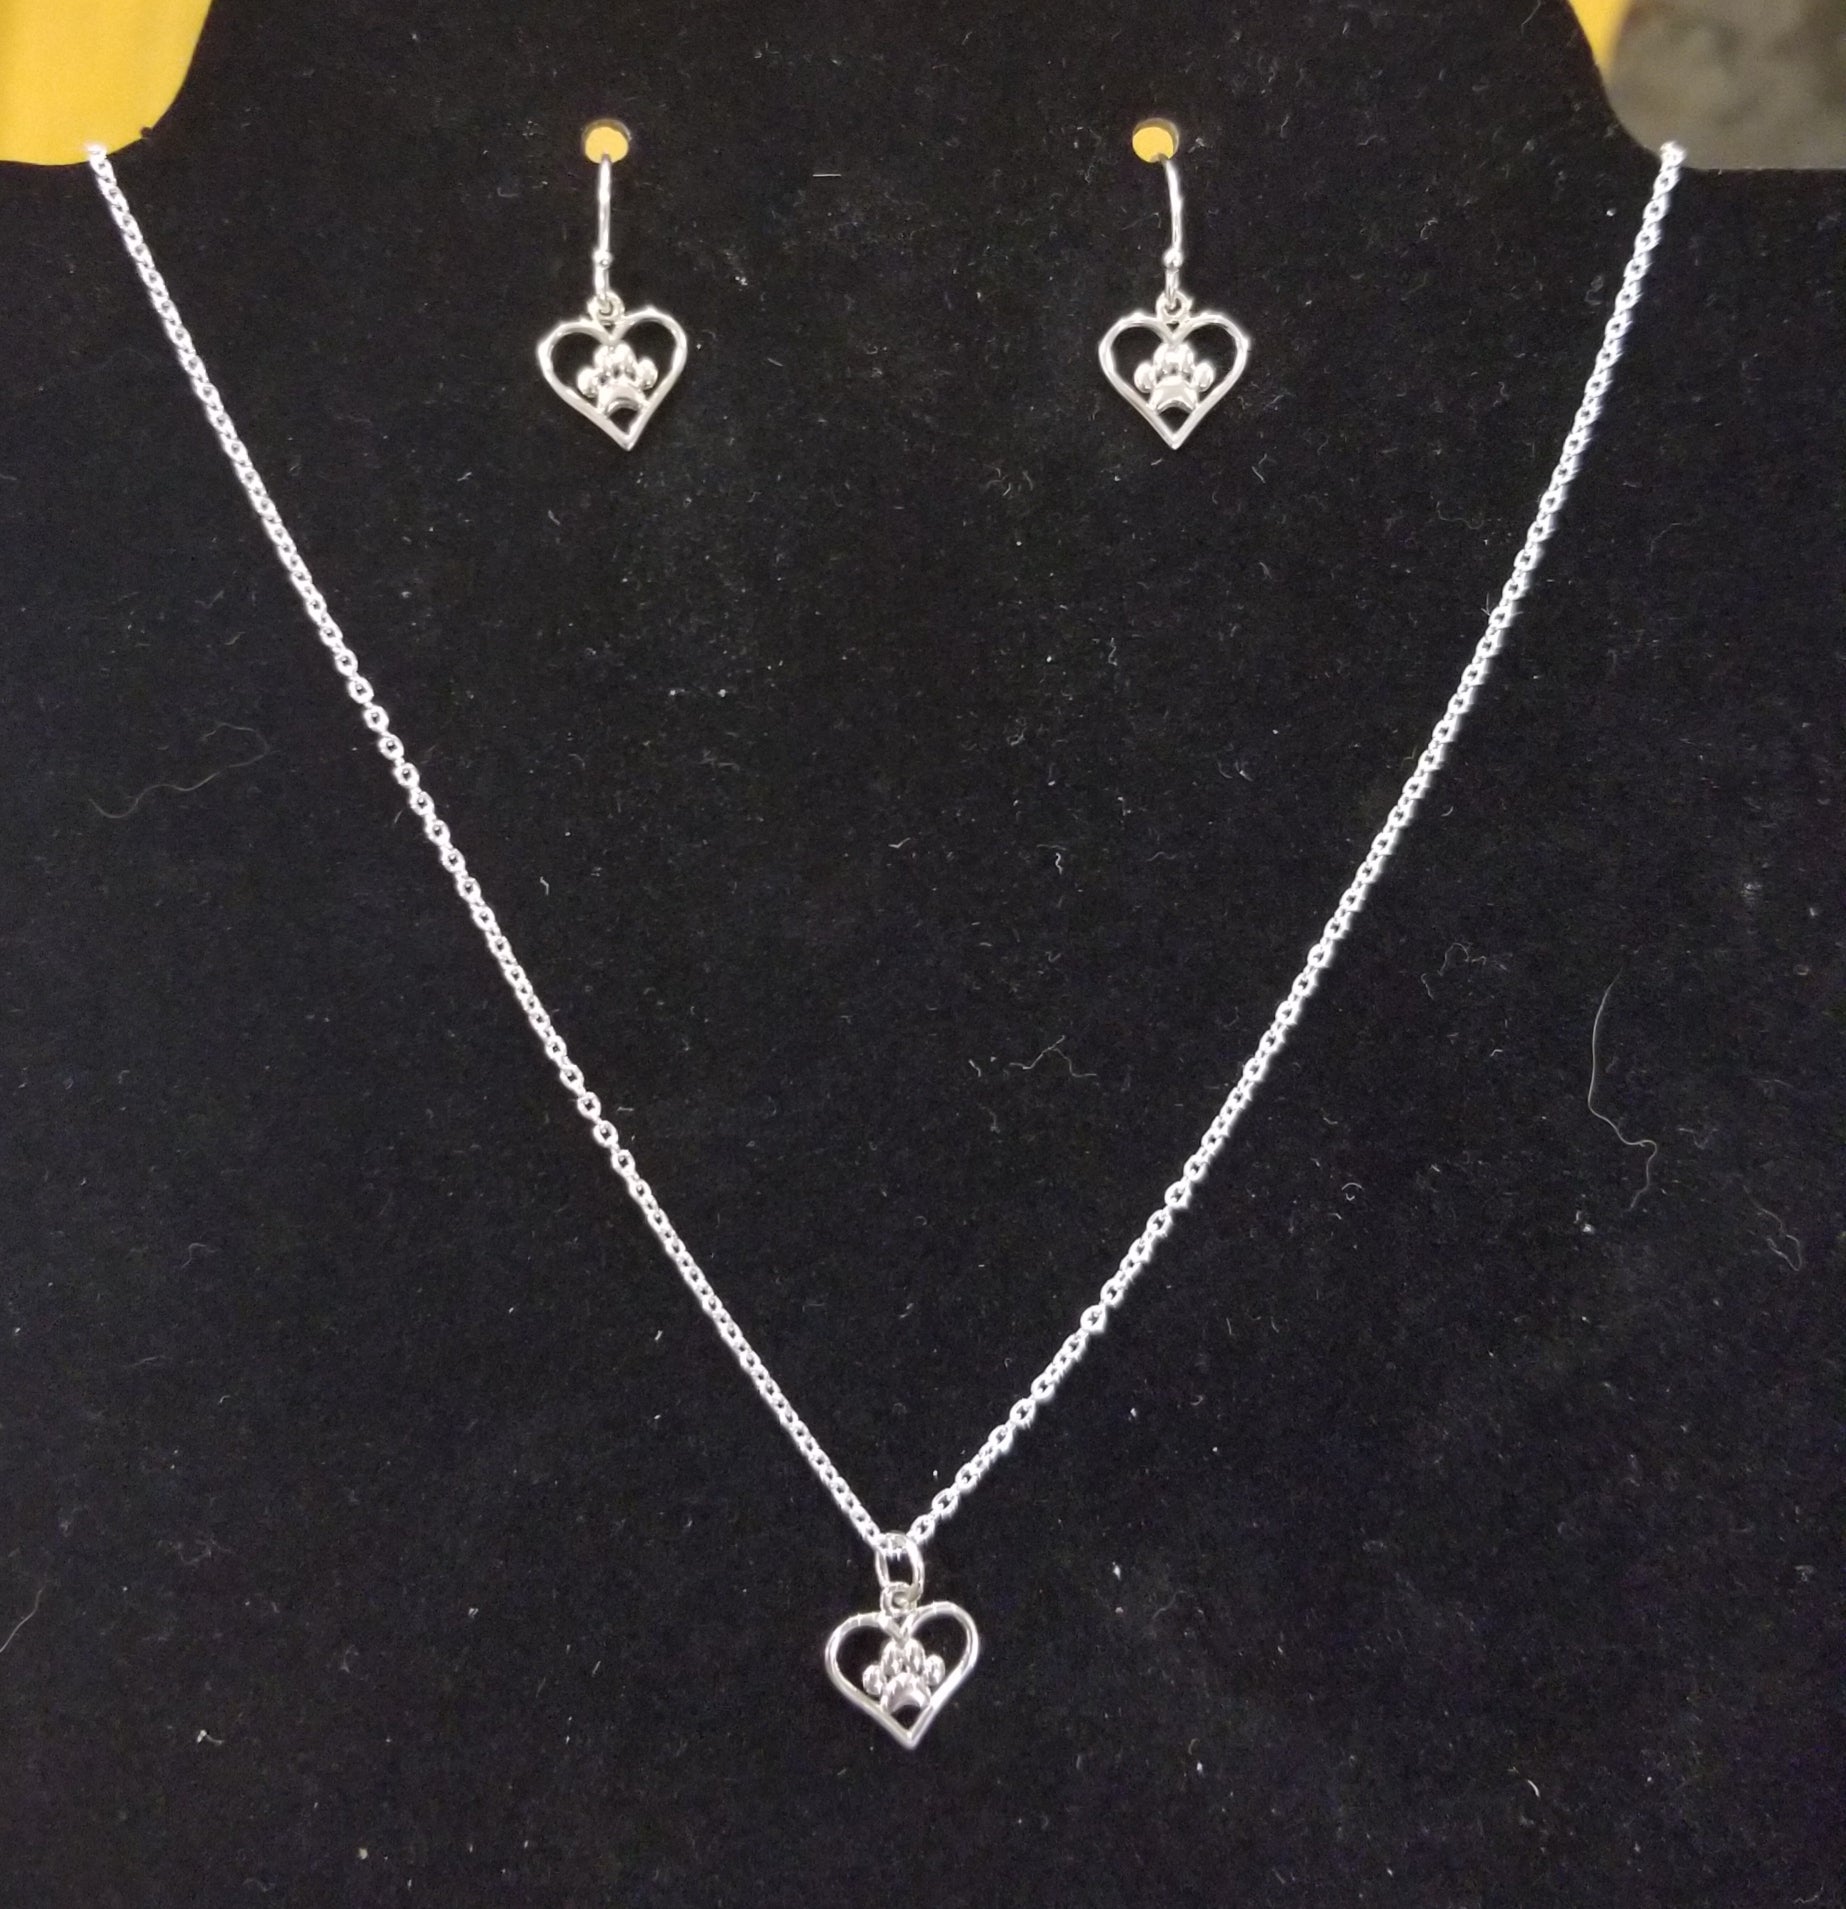 Heart paw Jewelry SET sterling silver pendant and matching earrings